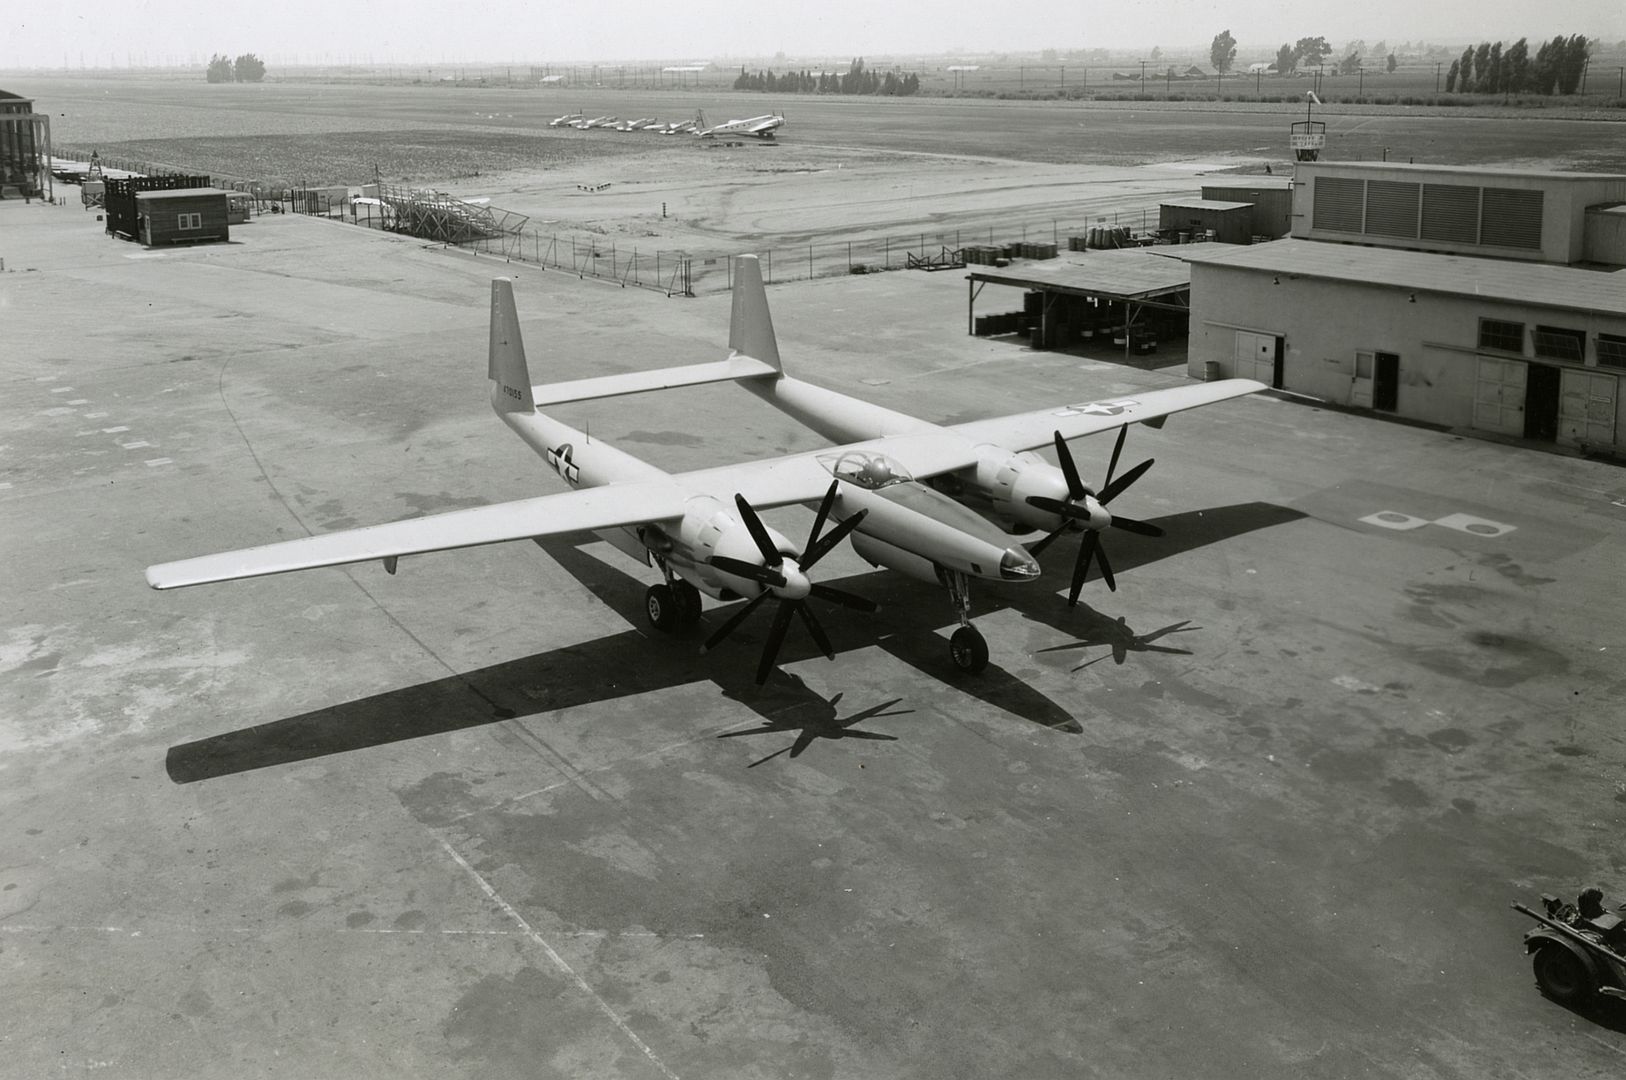 11 Prototype Plane On The Tarmac Before Its First Test Flight Culver City California 1947 April